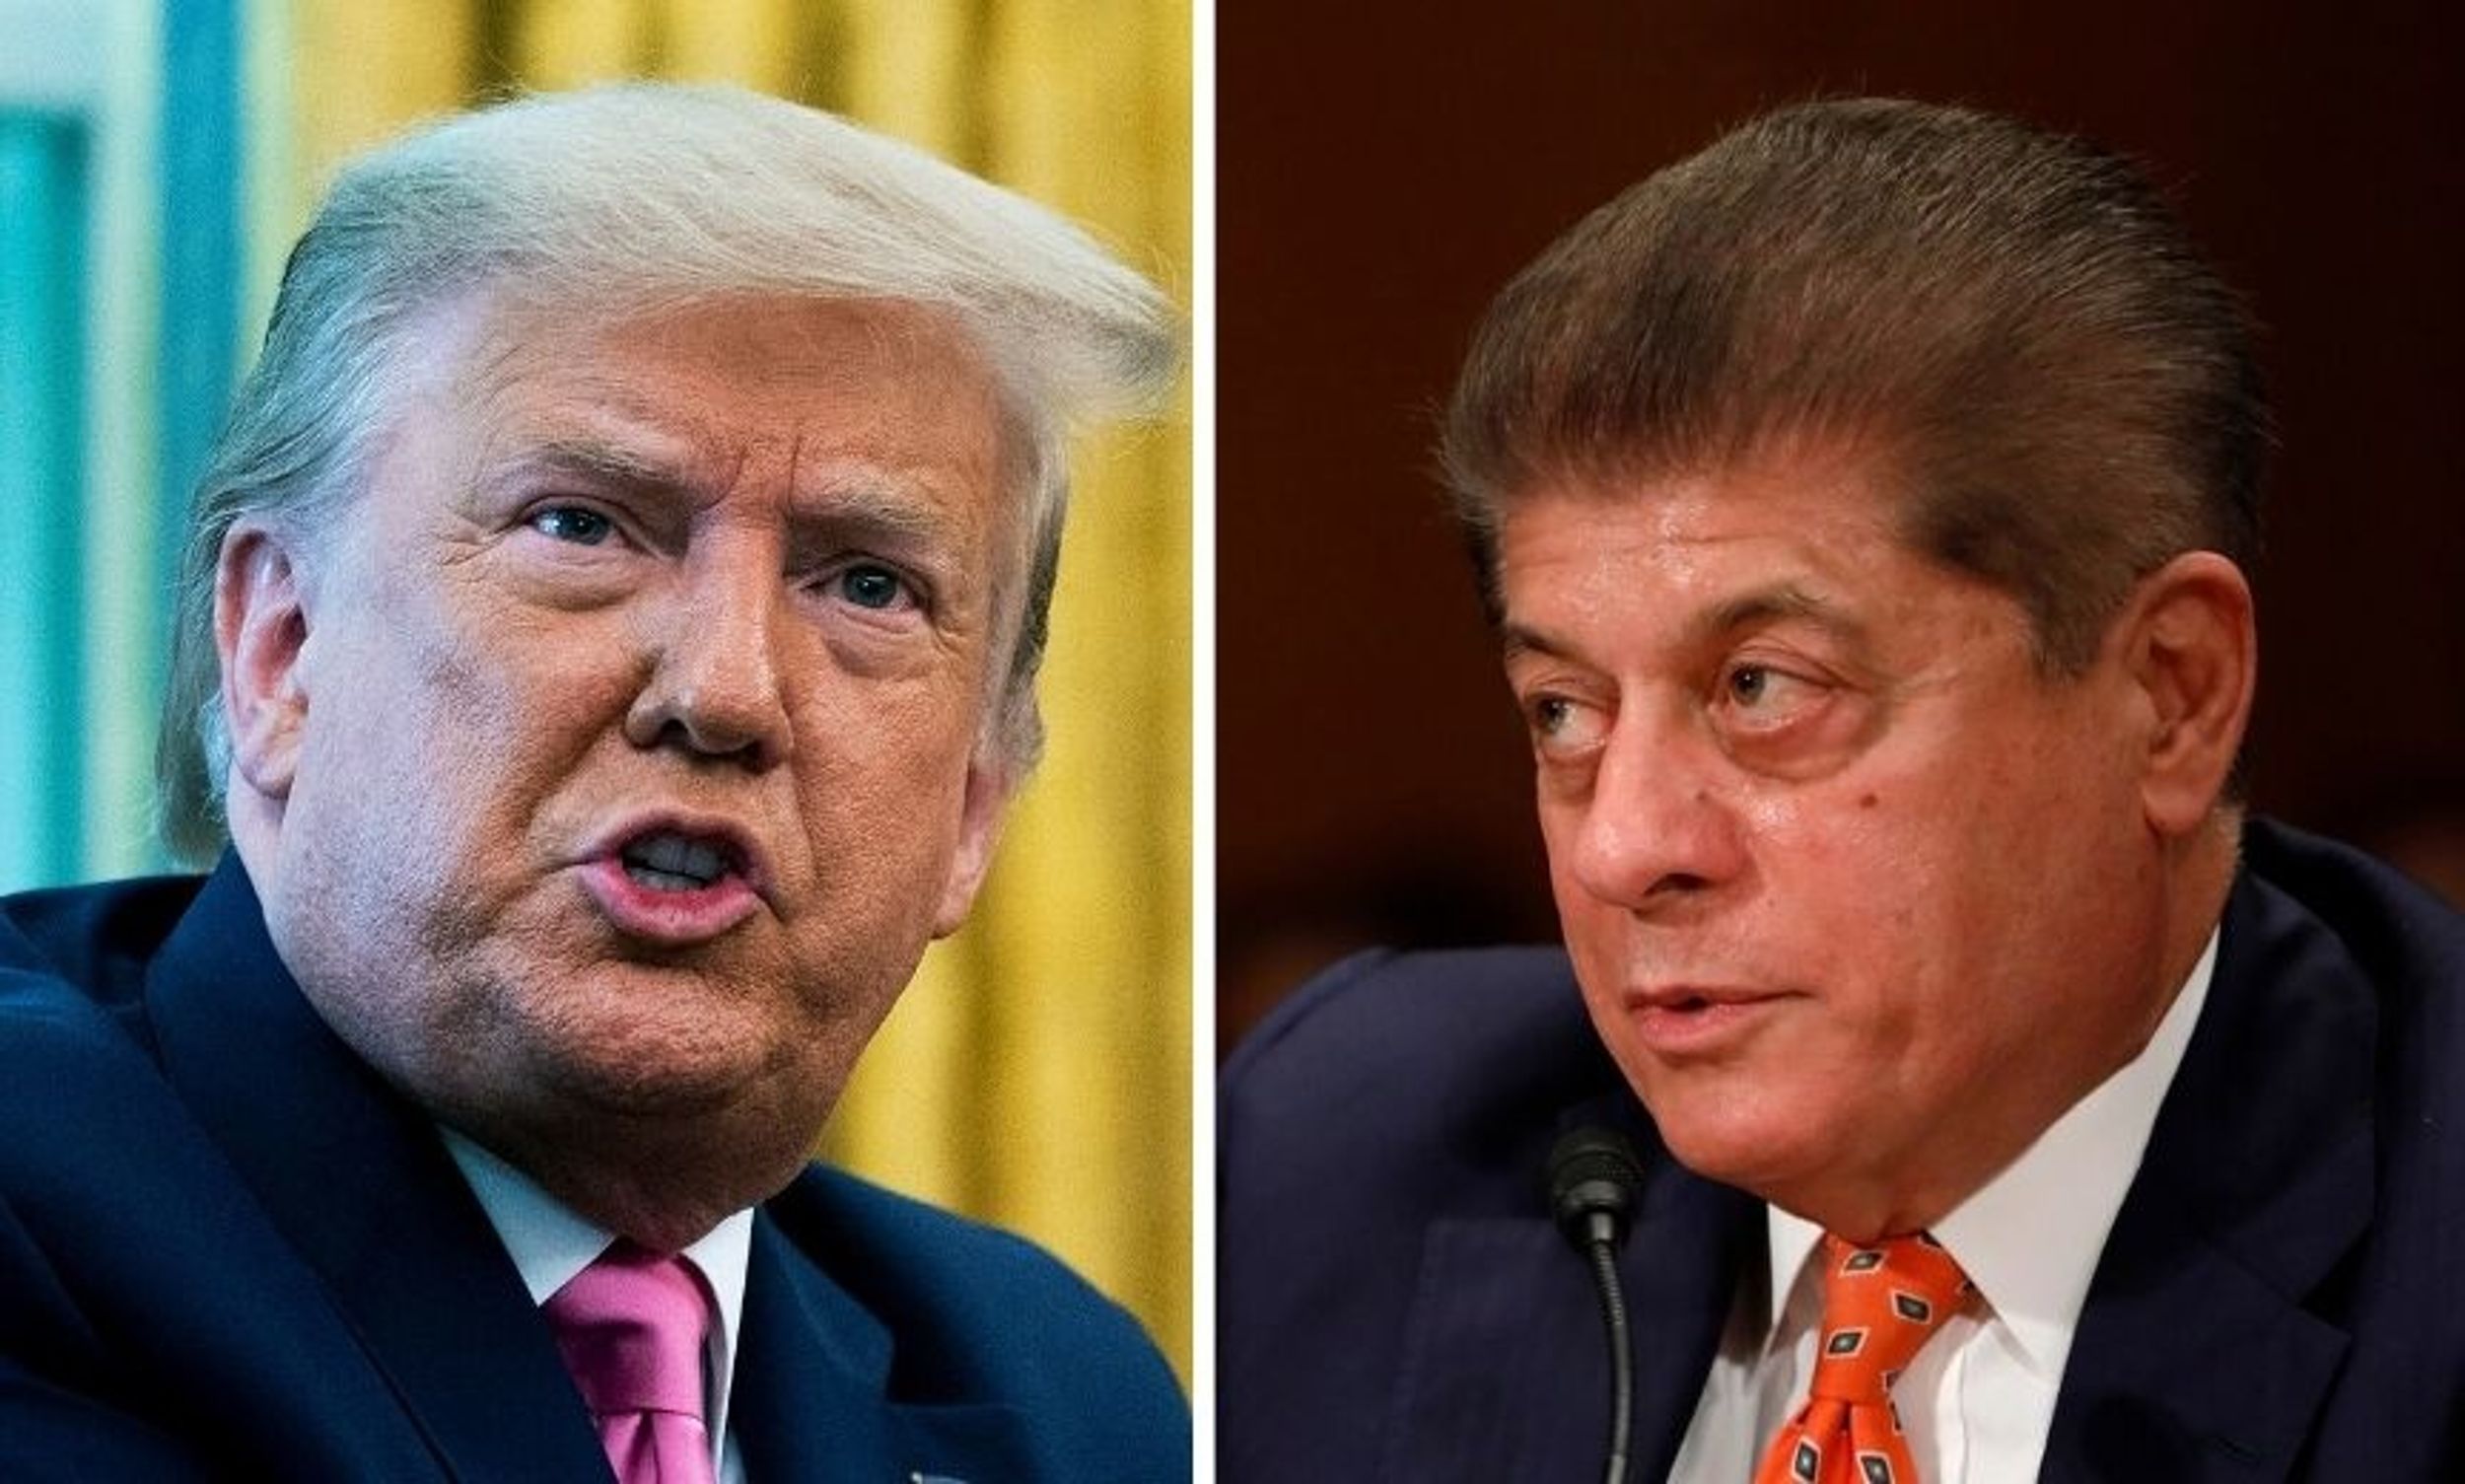 Fox News Legal Analyst Calls Trump's Deployment of Federal Troops to Portland 'Unlawful and Unconstitutional'